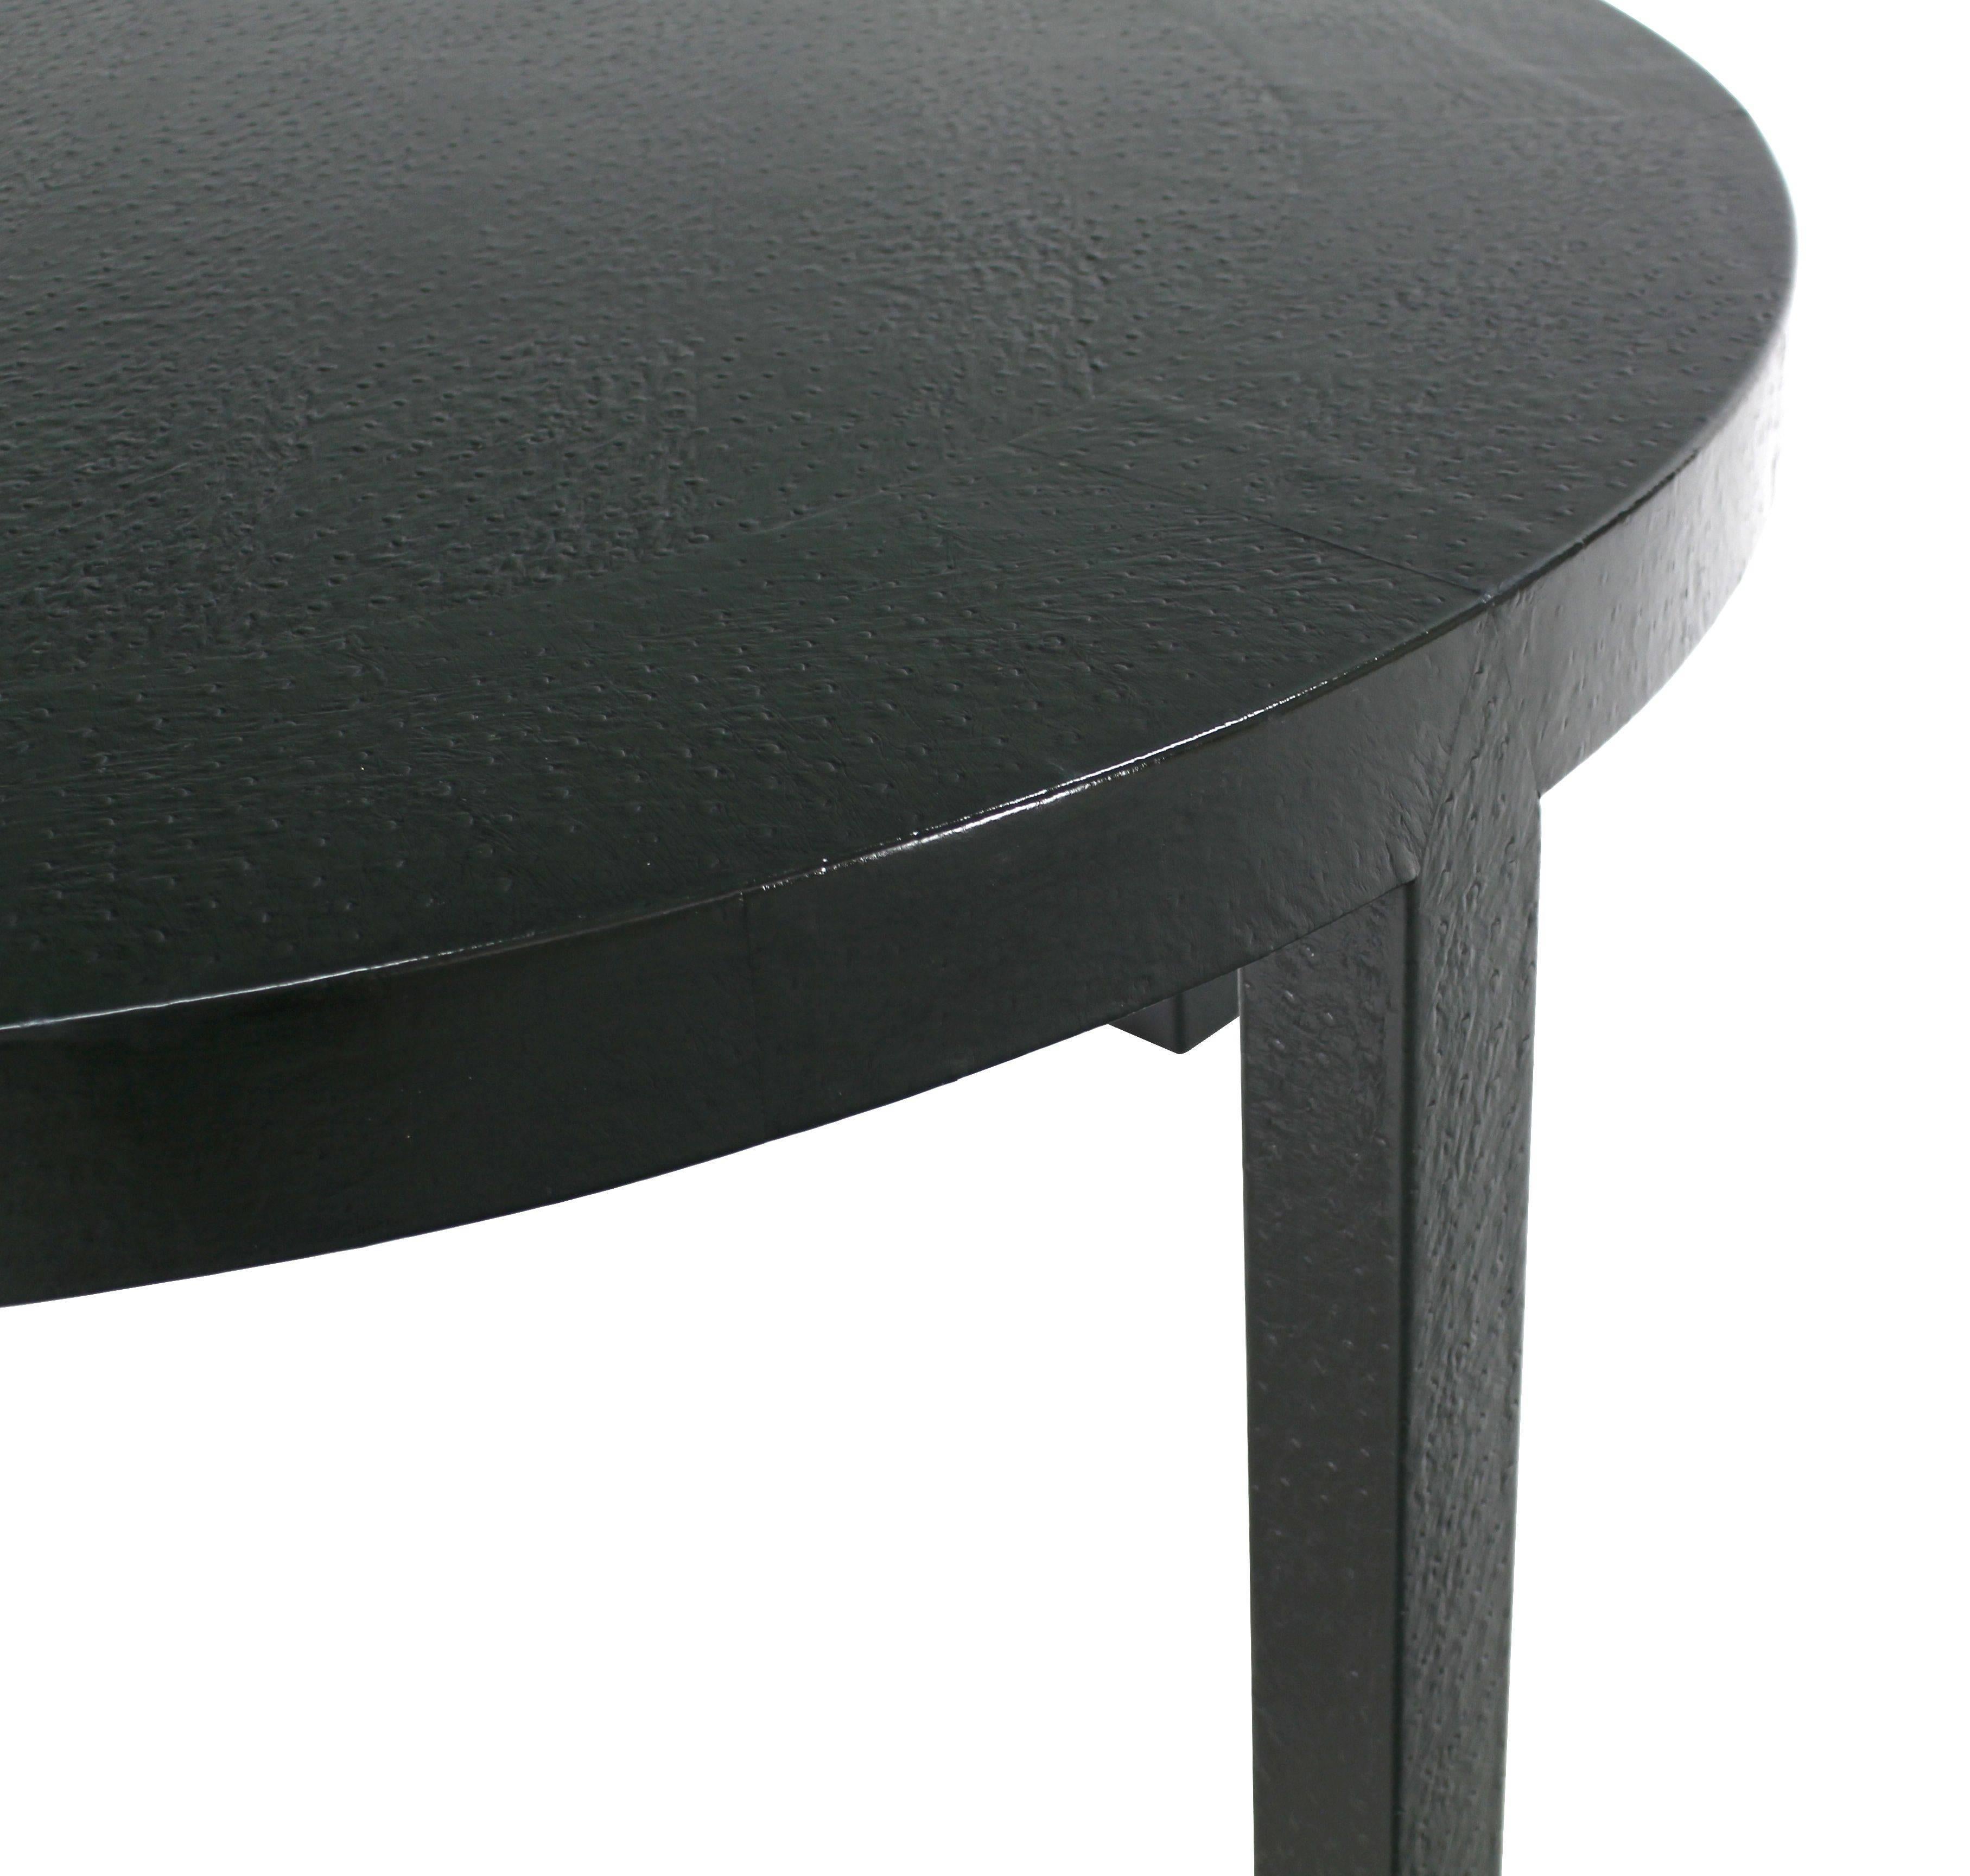 Dark Olive Ostrich Skin Round Coffee Table In Excellent Condition For Sale In Rockaway, NJ